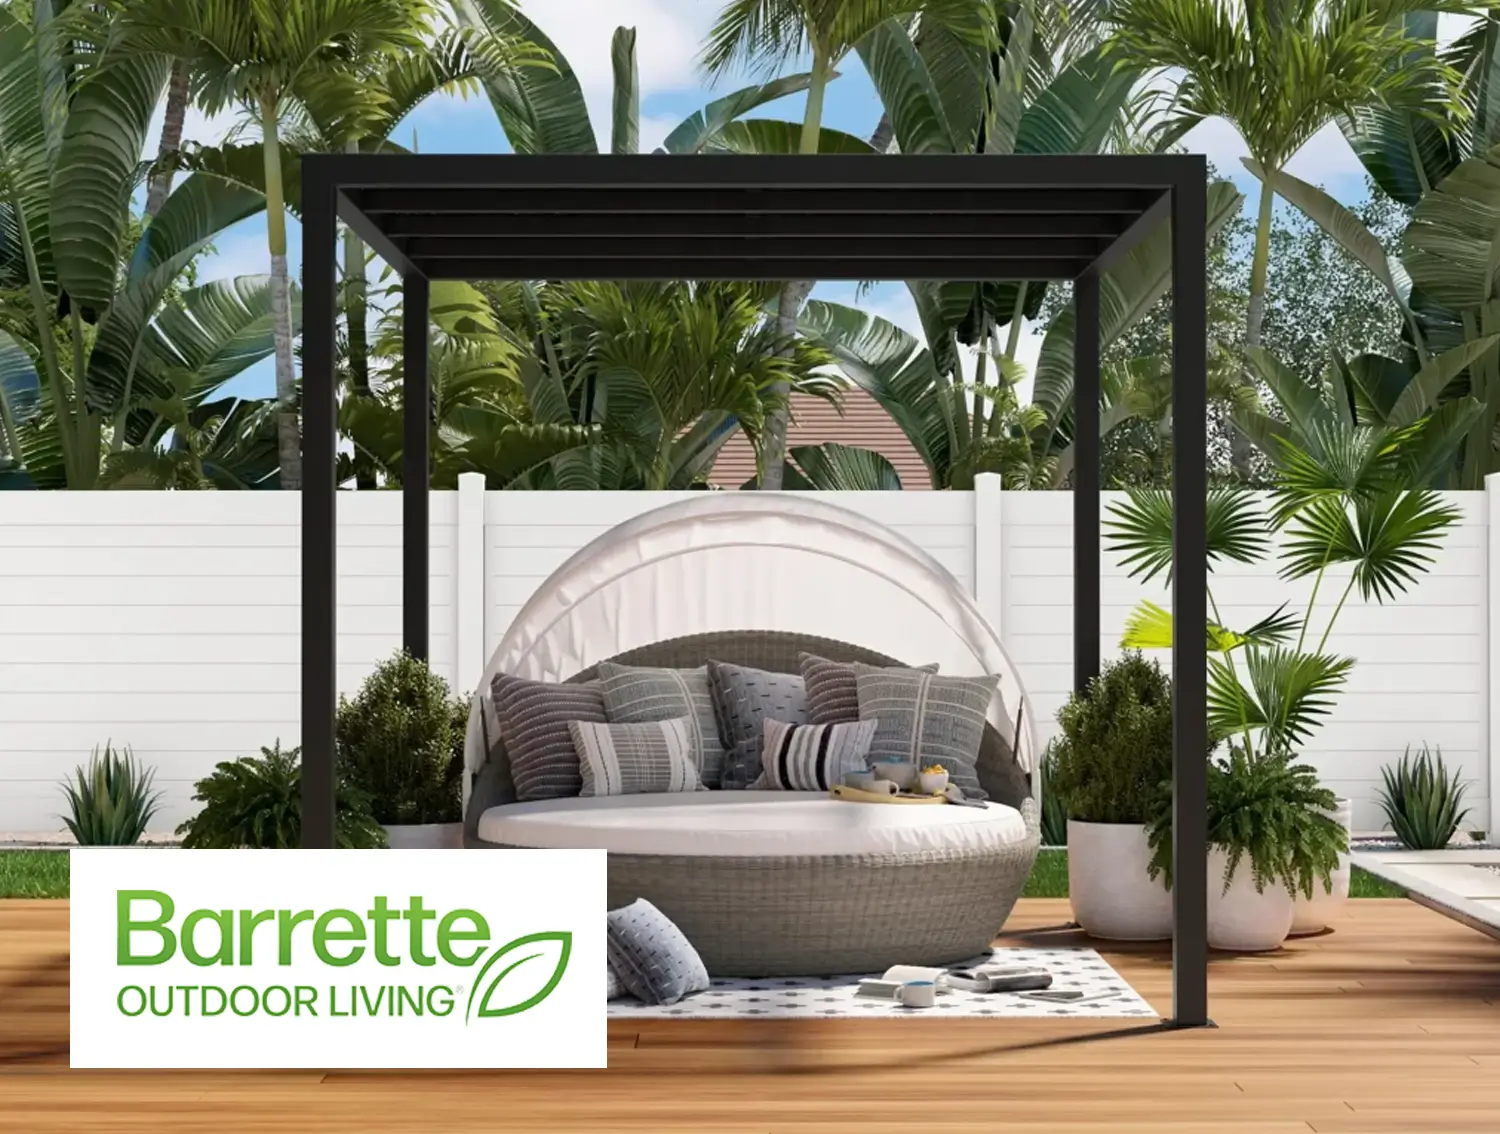 Revolutionizing Brand Visuals for Barrette Outdoor Living with Our CGI Expertise